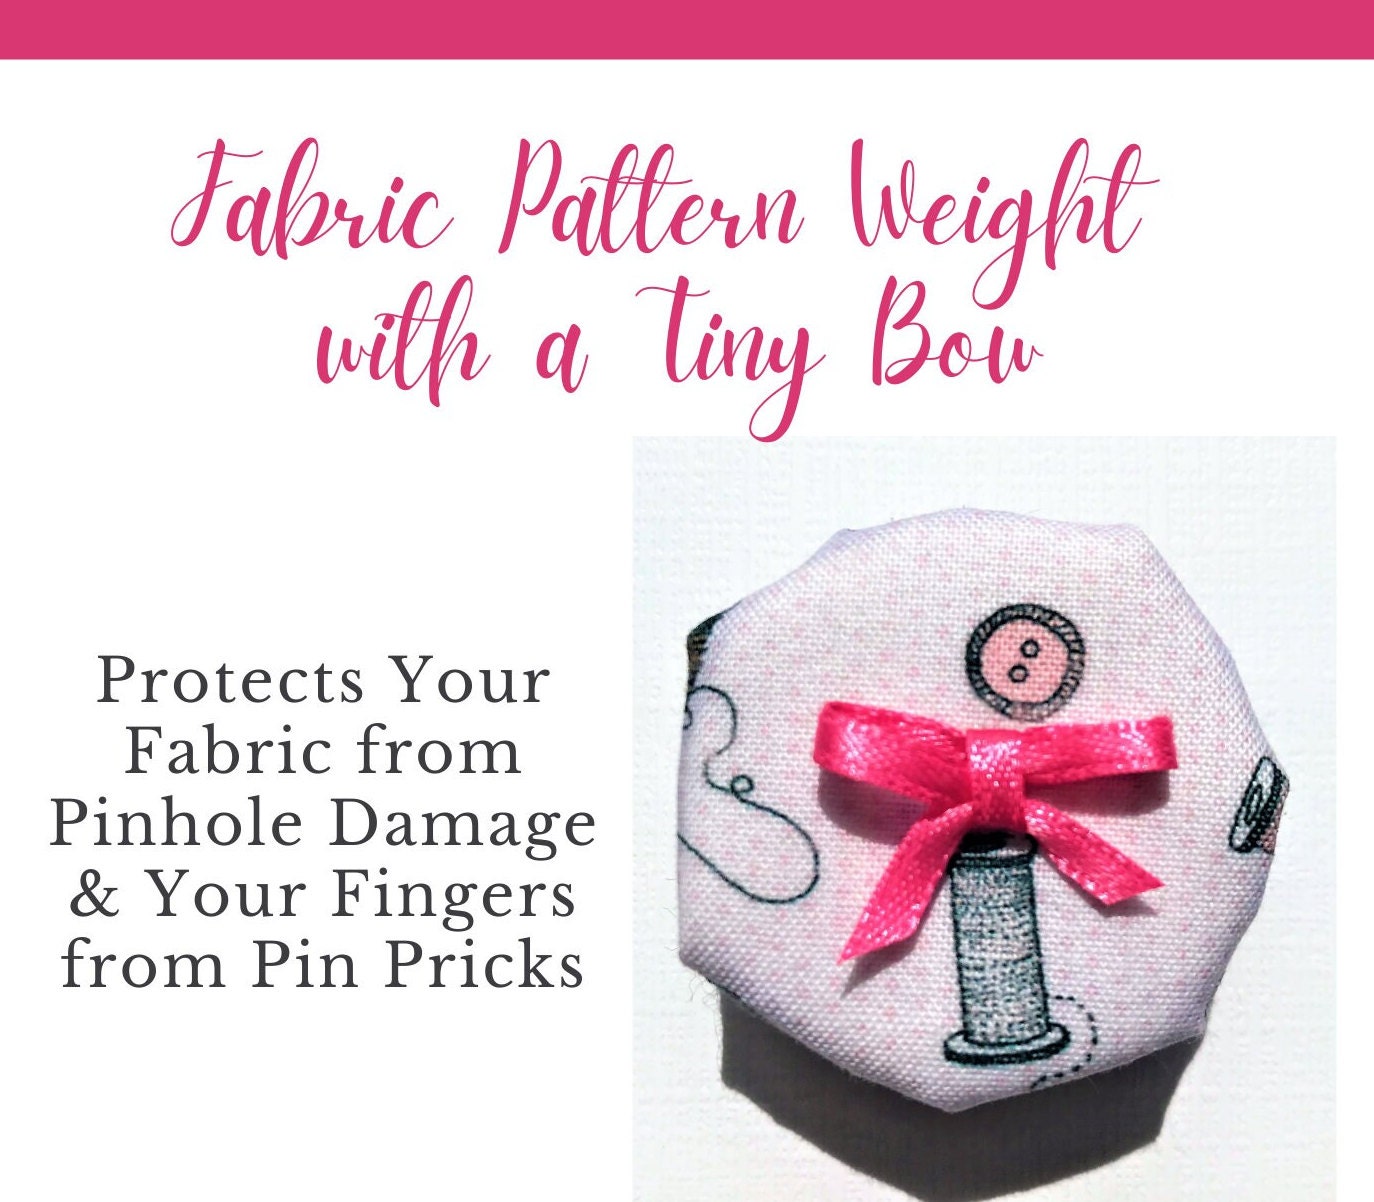 Sew Easy - Fabric Weights (round patterned) – Jolly Stitcher